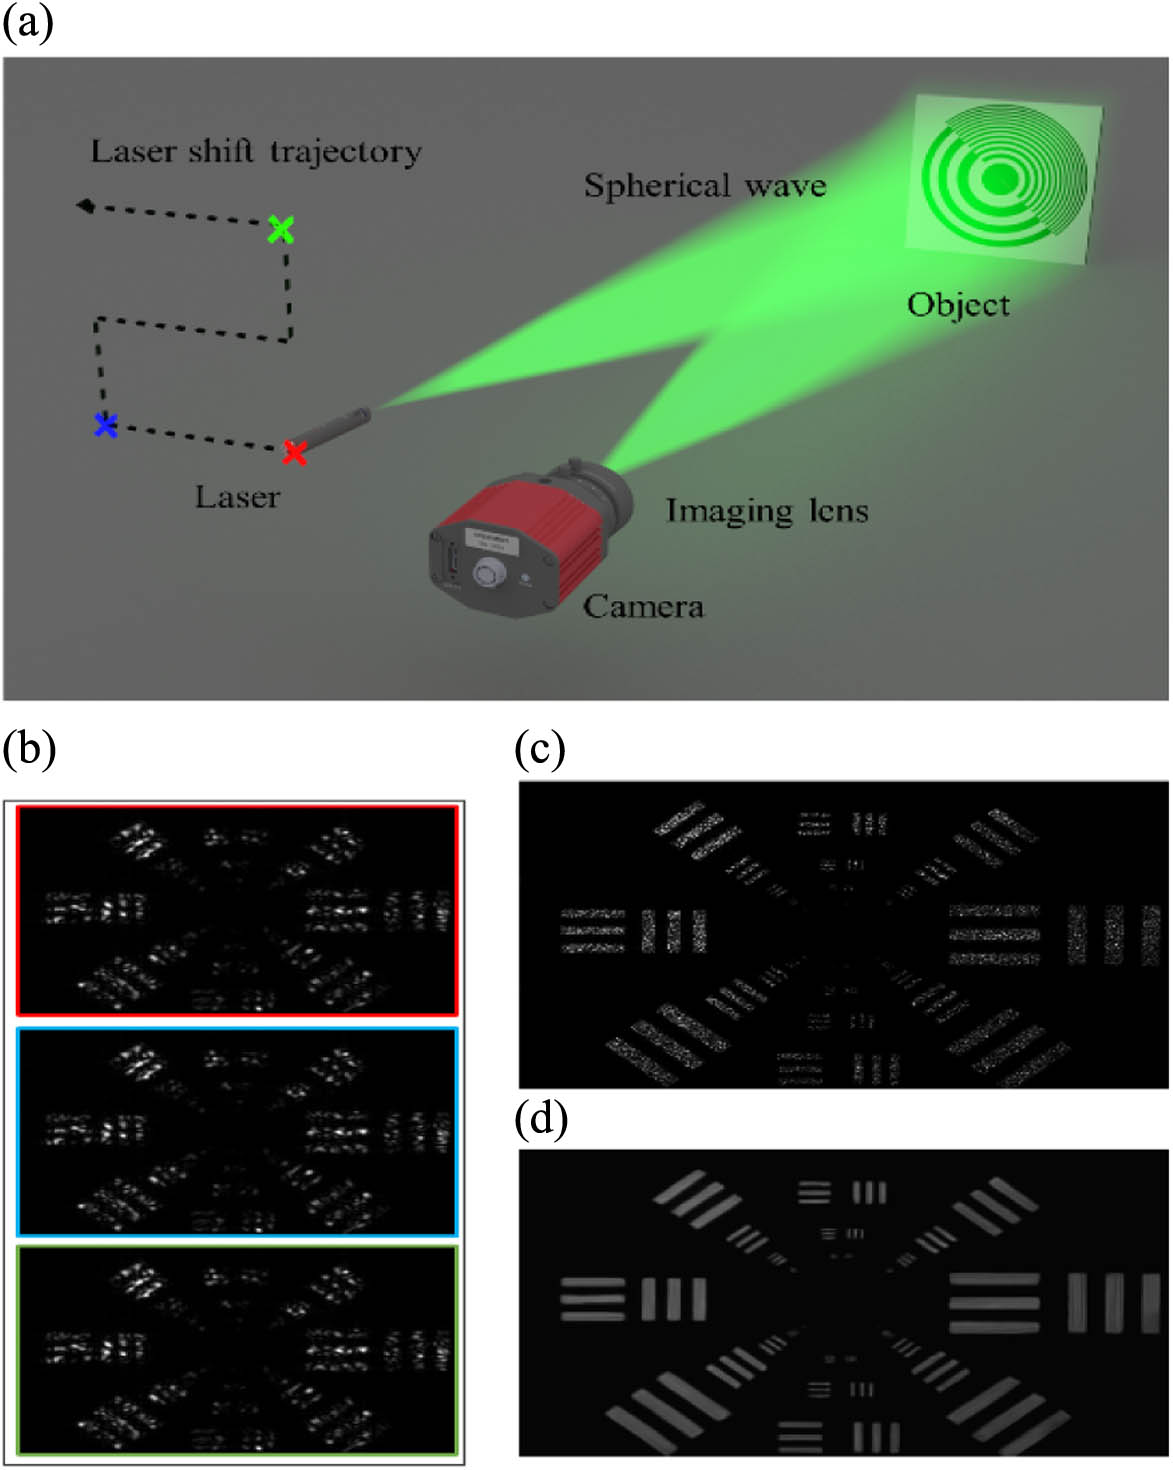 (a) Proposed scheme. The object is illuminated by a divergent laser beam to increase the FOV. The scattering from the object is recorded by the sensor via an imaging lens. As the numerical aperture of the imaging system is fixed, a limited resolution image is obtained on the sensor plane. (b) FP raw images. By shifting the laser source with an x-y moving stage, a sequence of raw images is captured. An example of a raw image is blurred and degraded by speckles. Using the captured image sequence, the super-resolution reconstruction can be achieved with the proposed method. The FP reconstruction in (c) reduces the speckle size and improves the resolution. A speckle denoising algorithm is further performed to improve the quality of the reconstruction, and its denoising image is shown in (d).